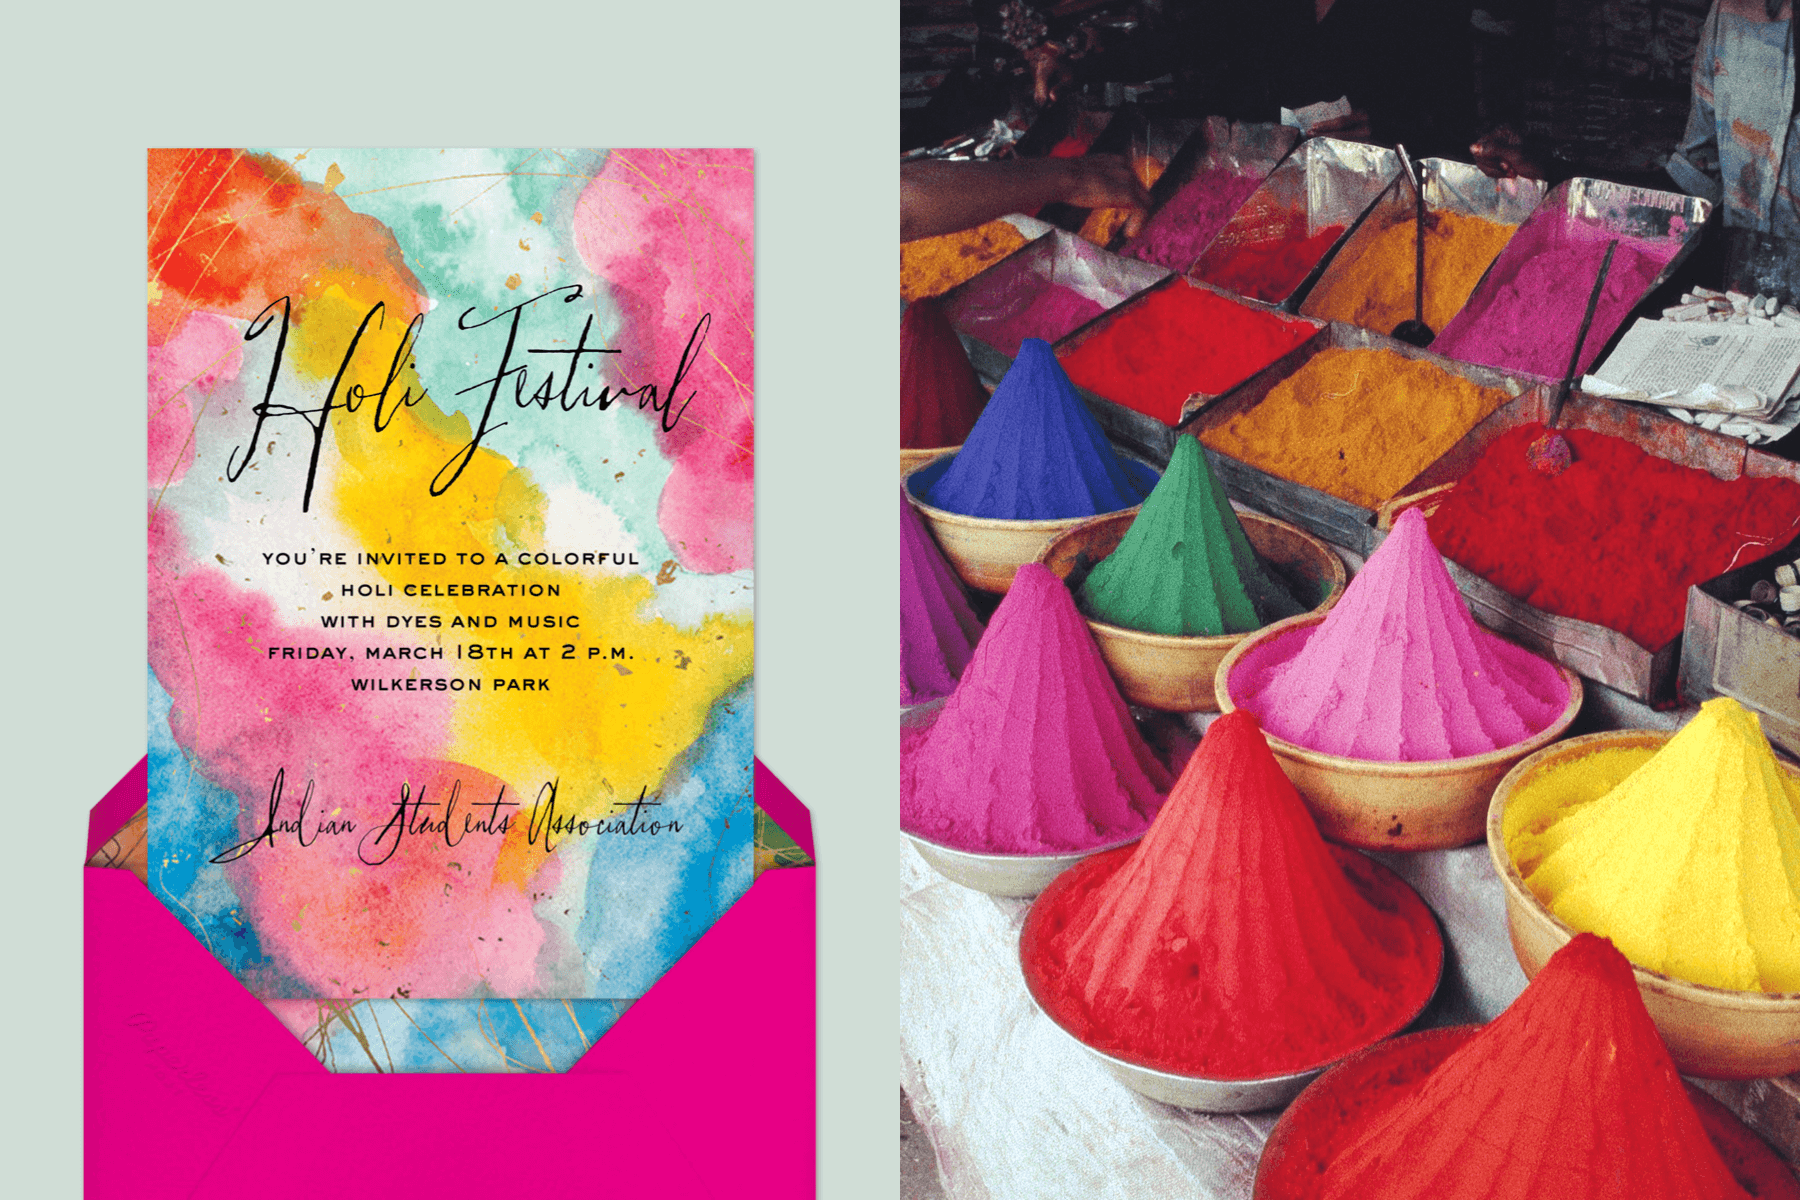 Left: A holi invitation with watercolor background; Right: A merchant’s display of colored powder.